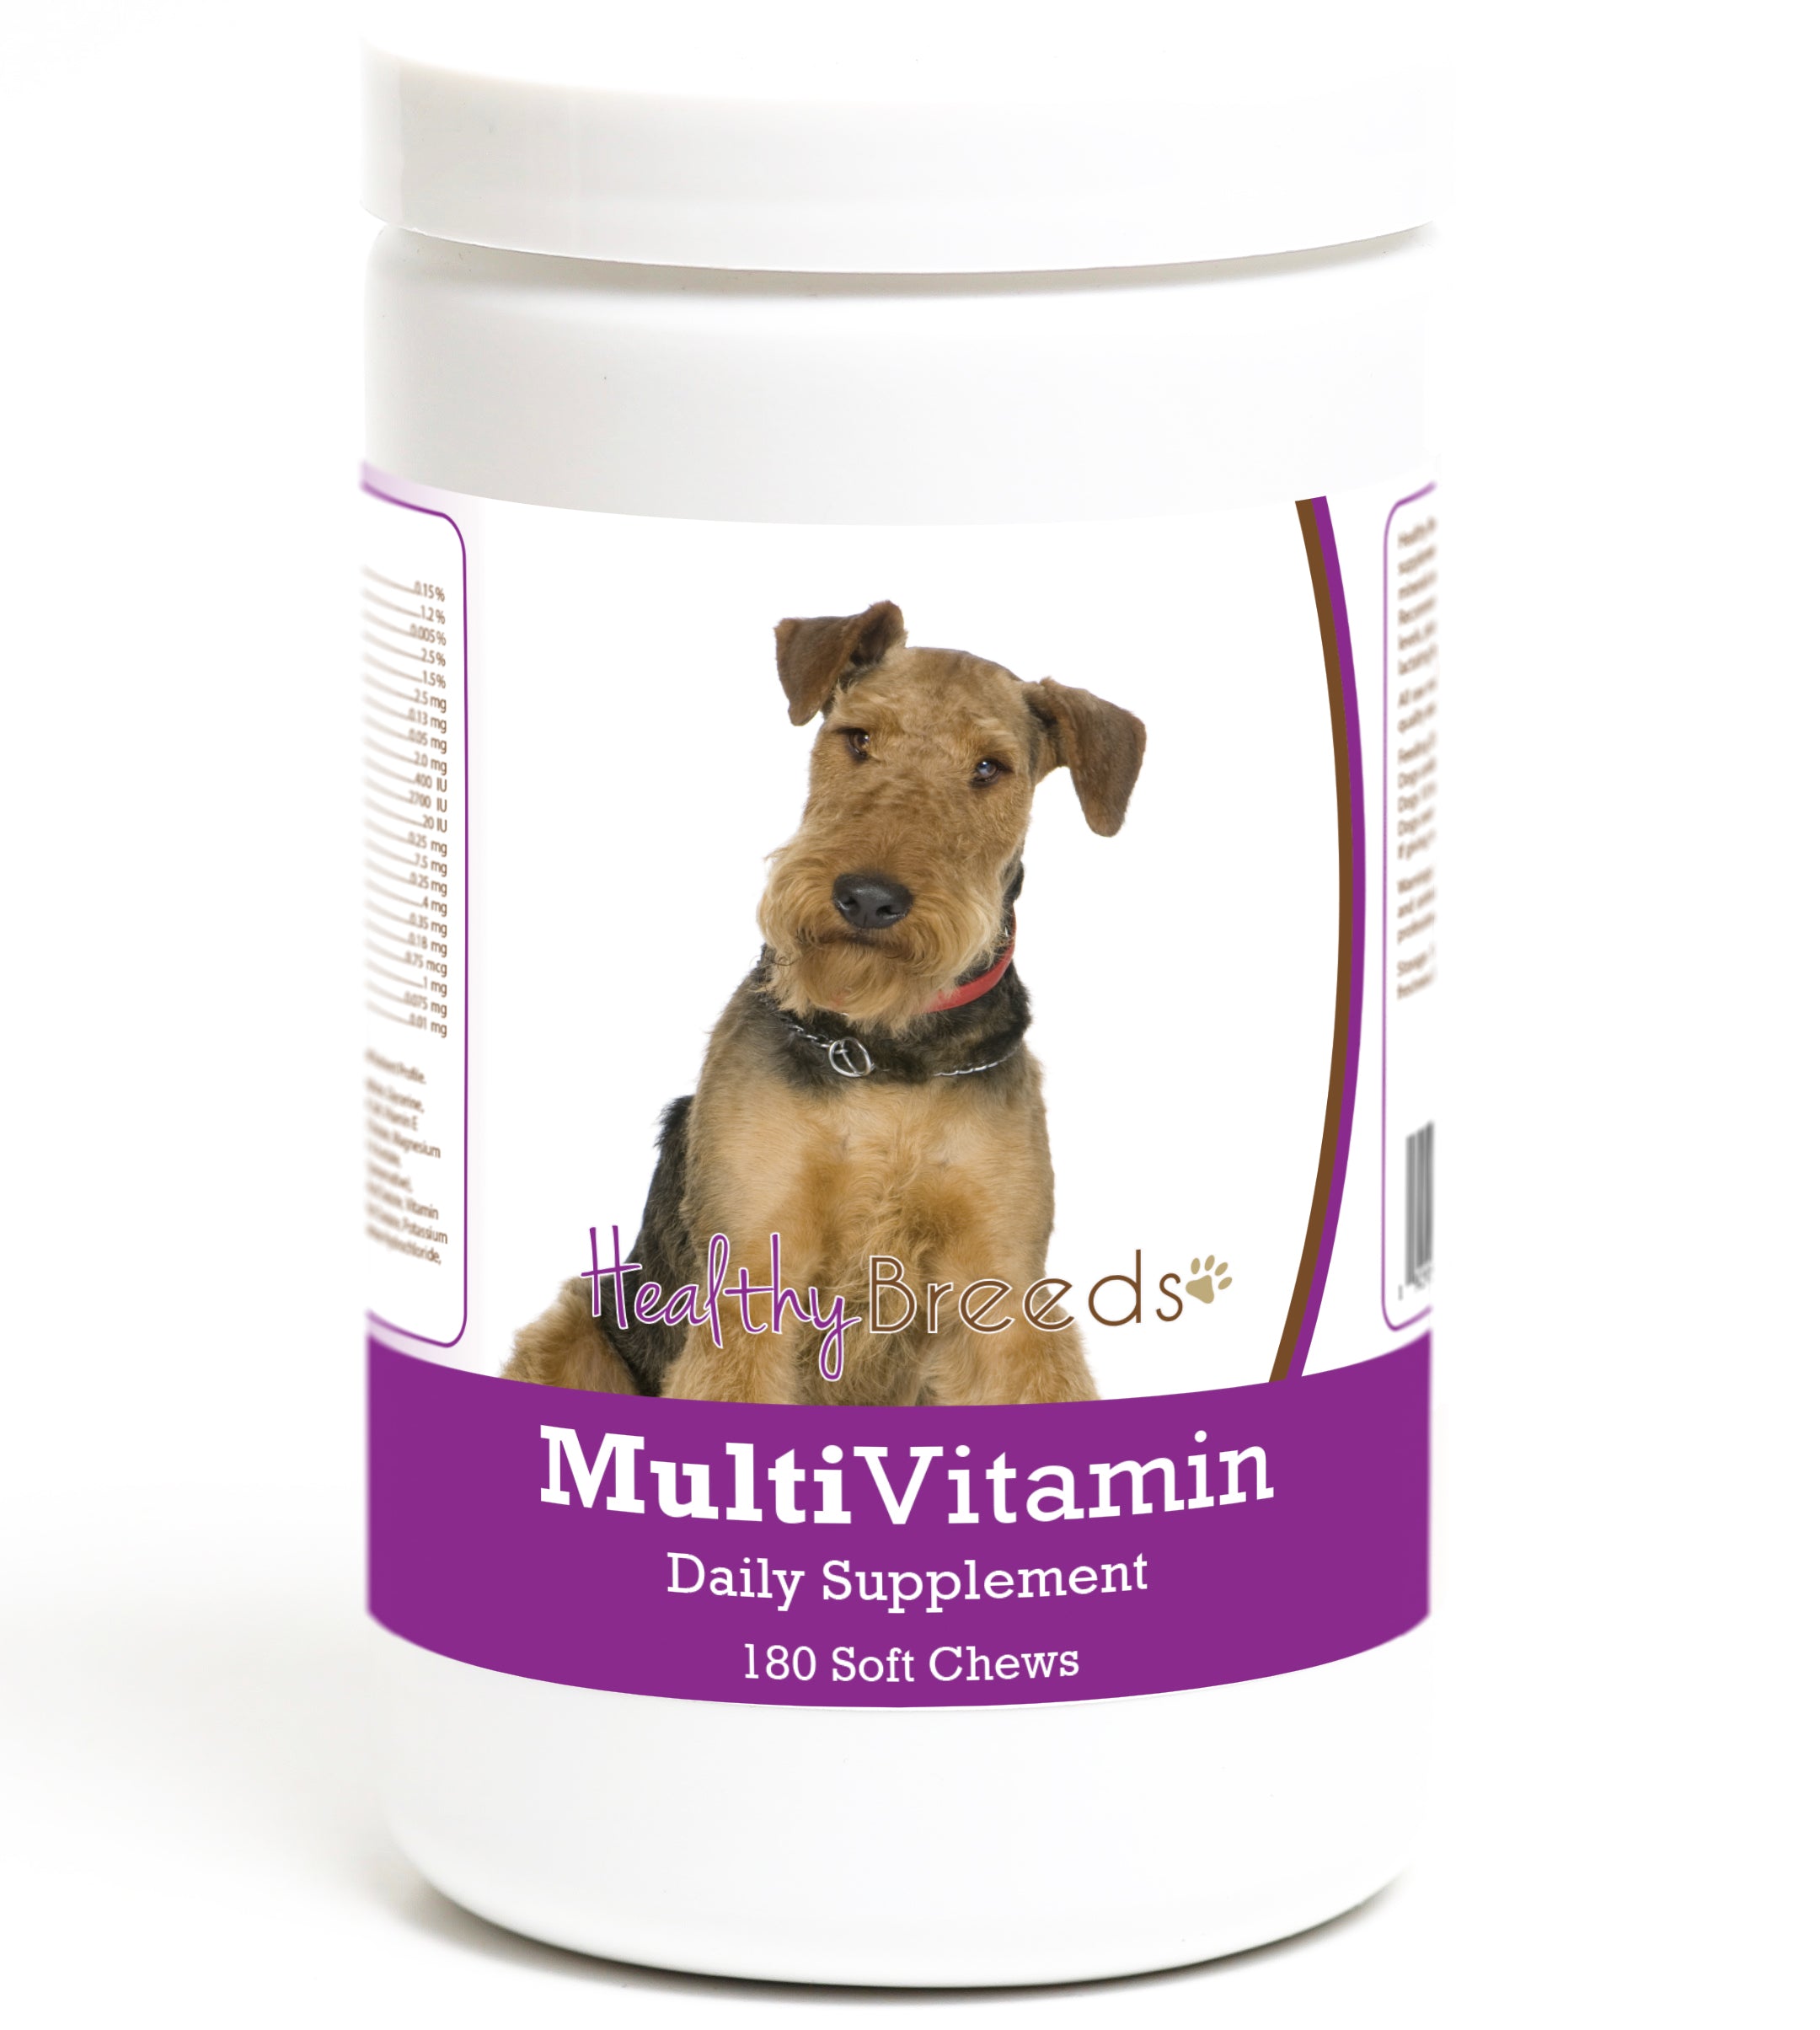 Airedale Terrier Multivitamin Soft Chew for Dogs 180 Count